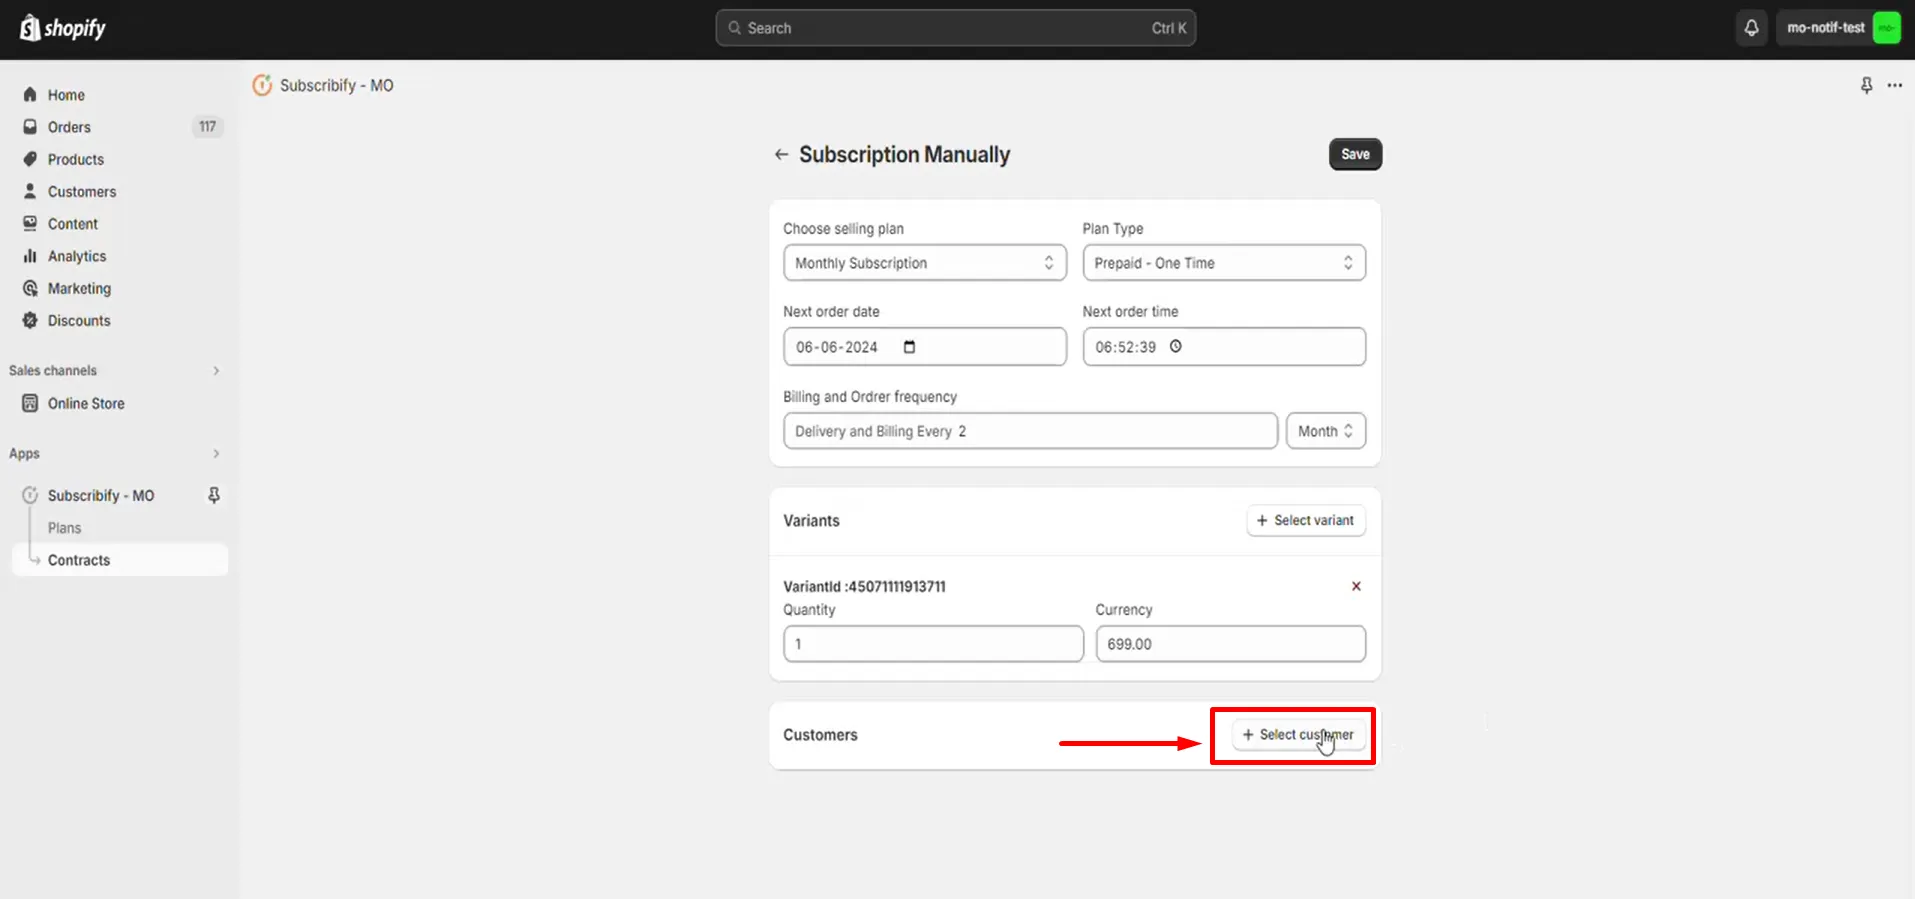 Shopify Subscription Management - select customers for manual Subscription plan